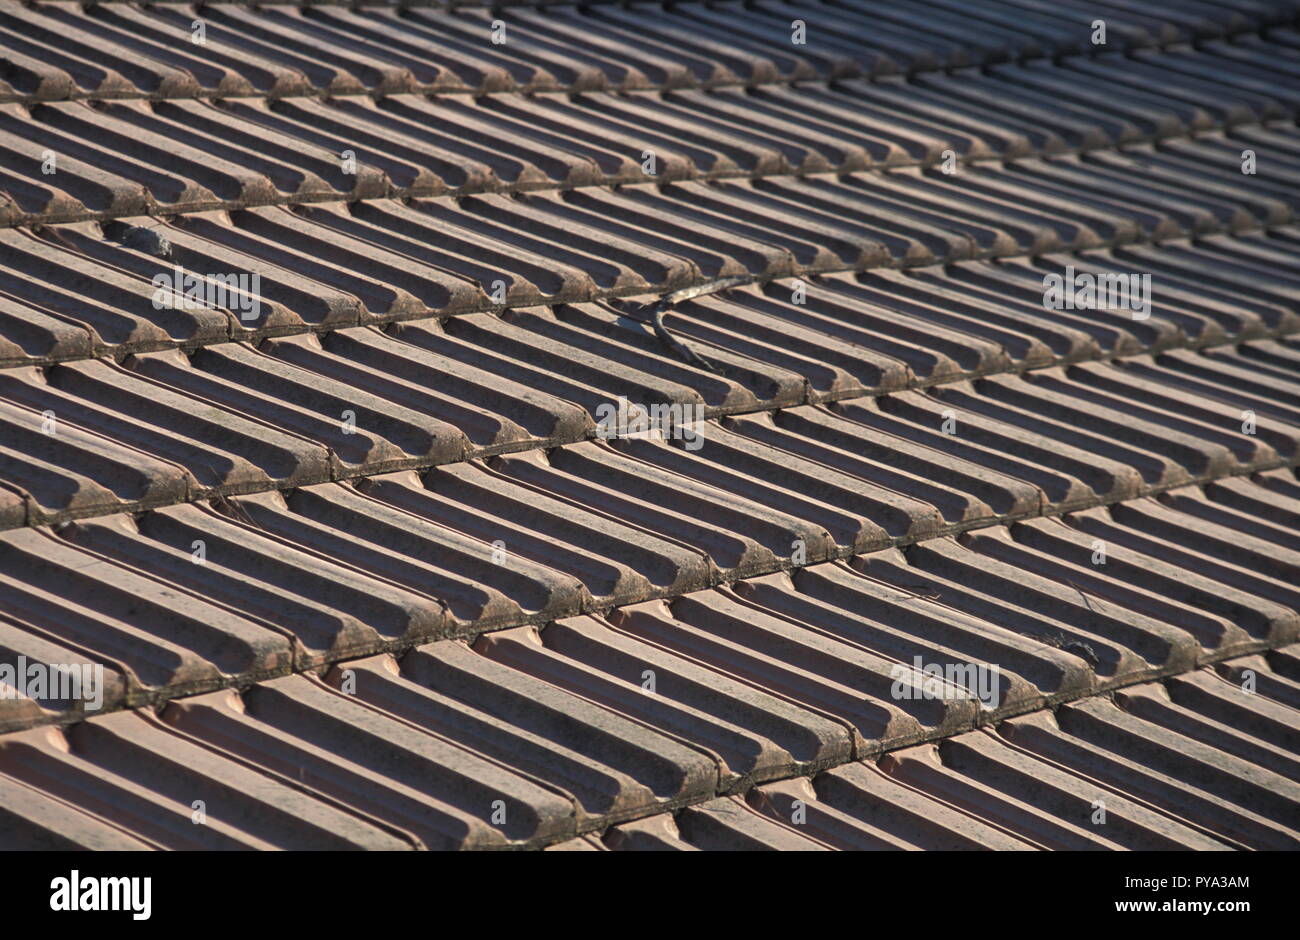 roof cover with tiles Stock Photo